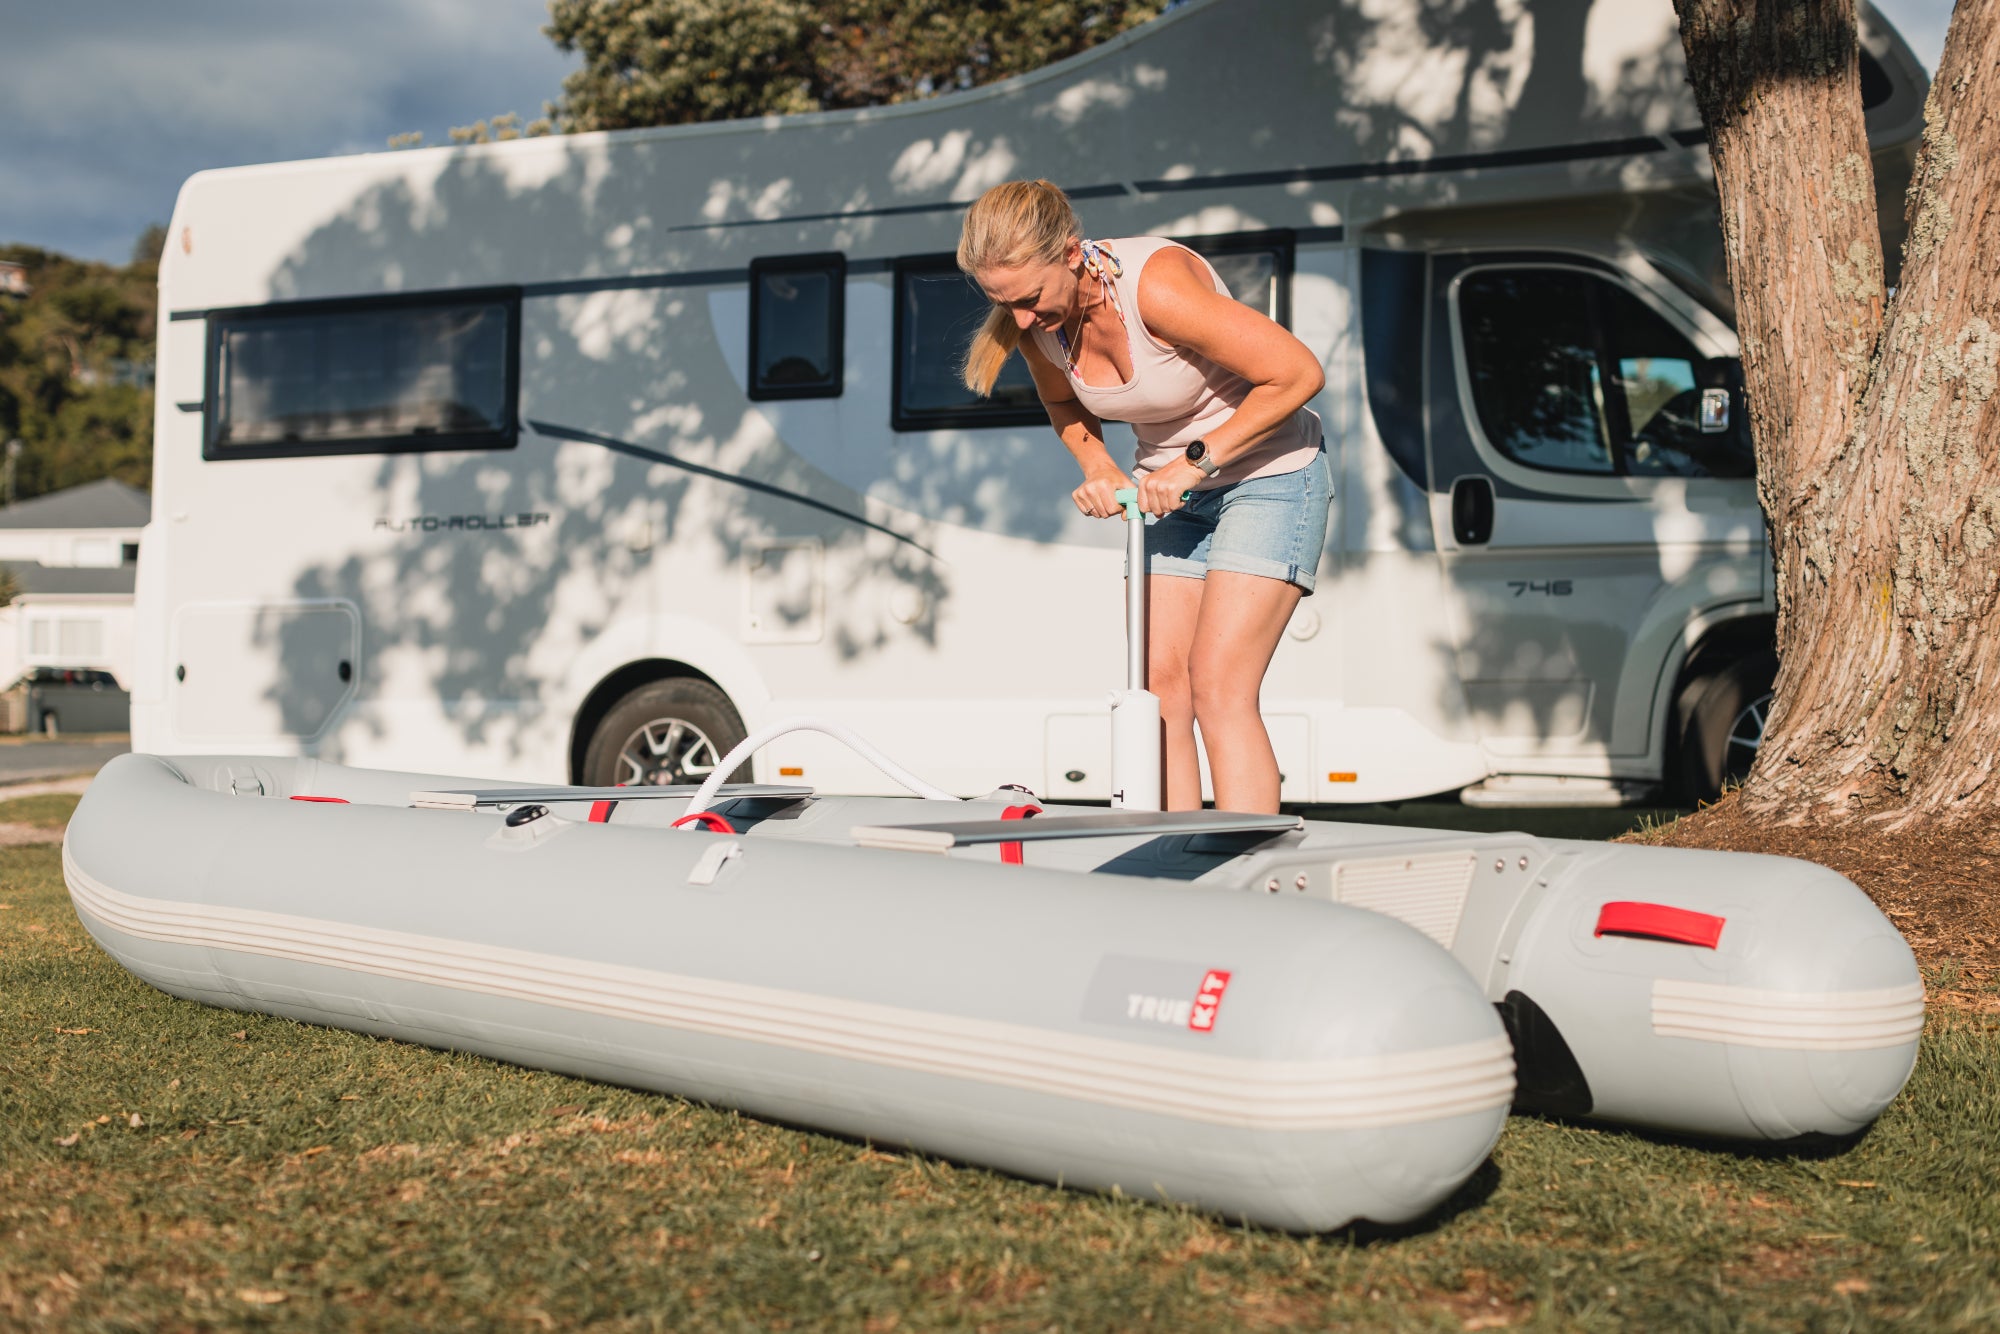 True Kit inflatables - easy and fast to set up